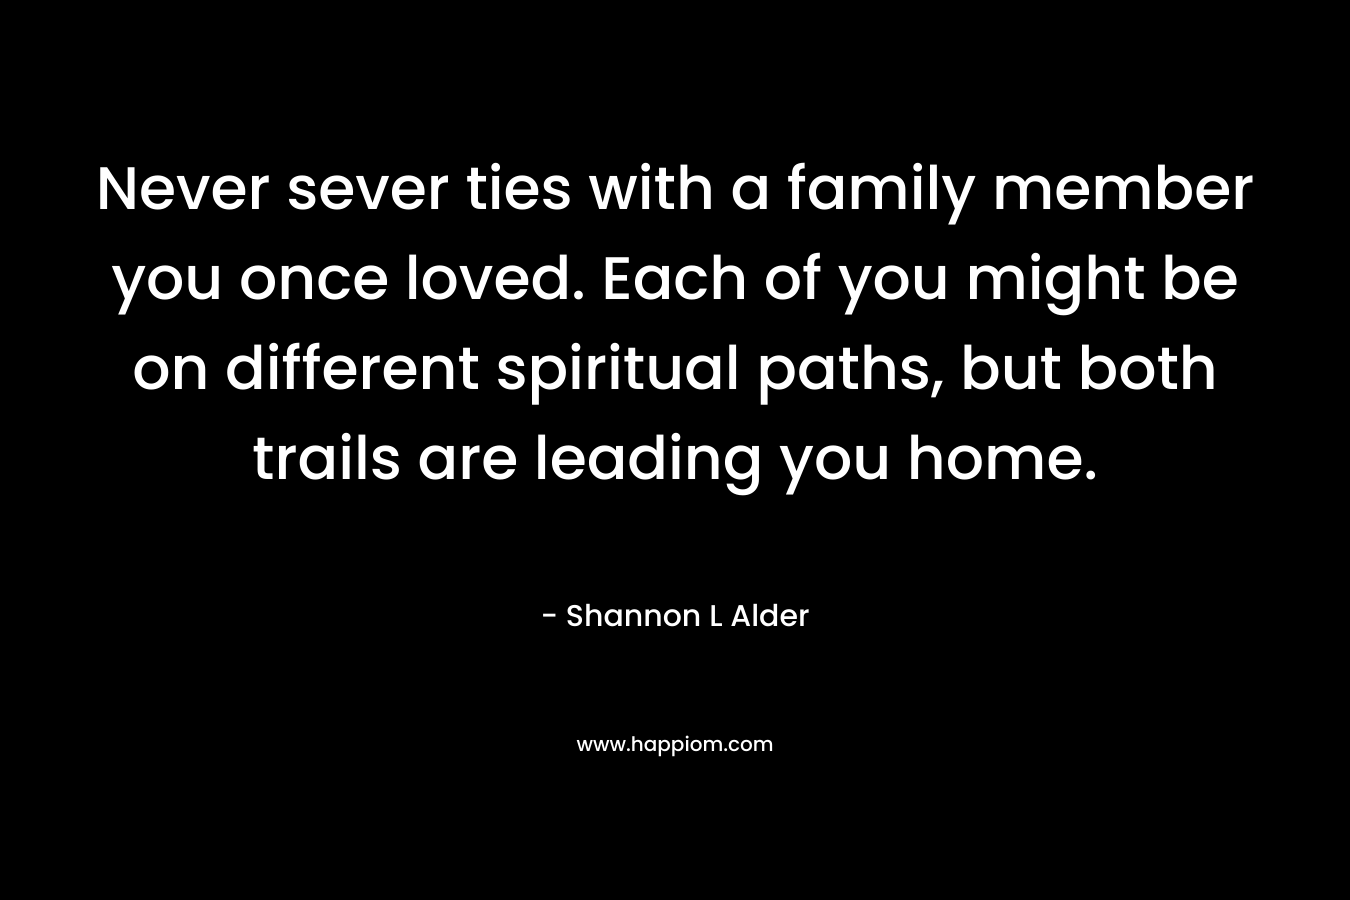 Never sever ties with a family member you once loved. Each of you might be on different spiritual paths, but both trails are leading you home. – Shannon L Alder